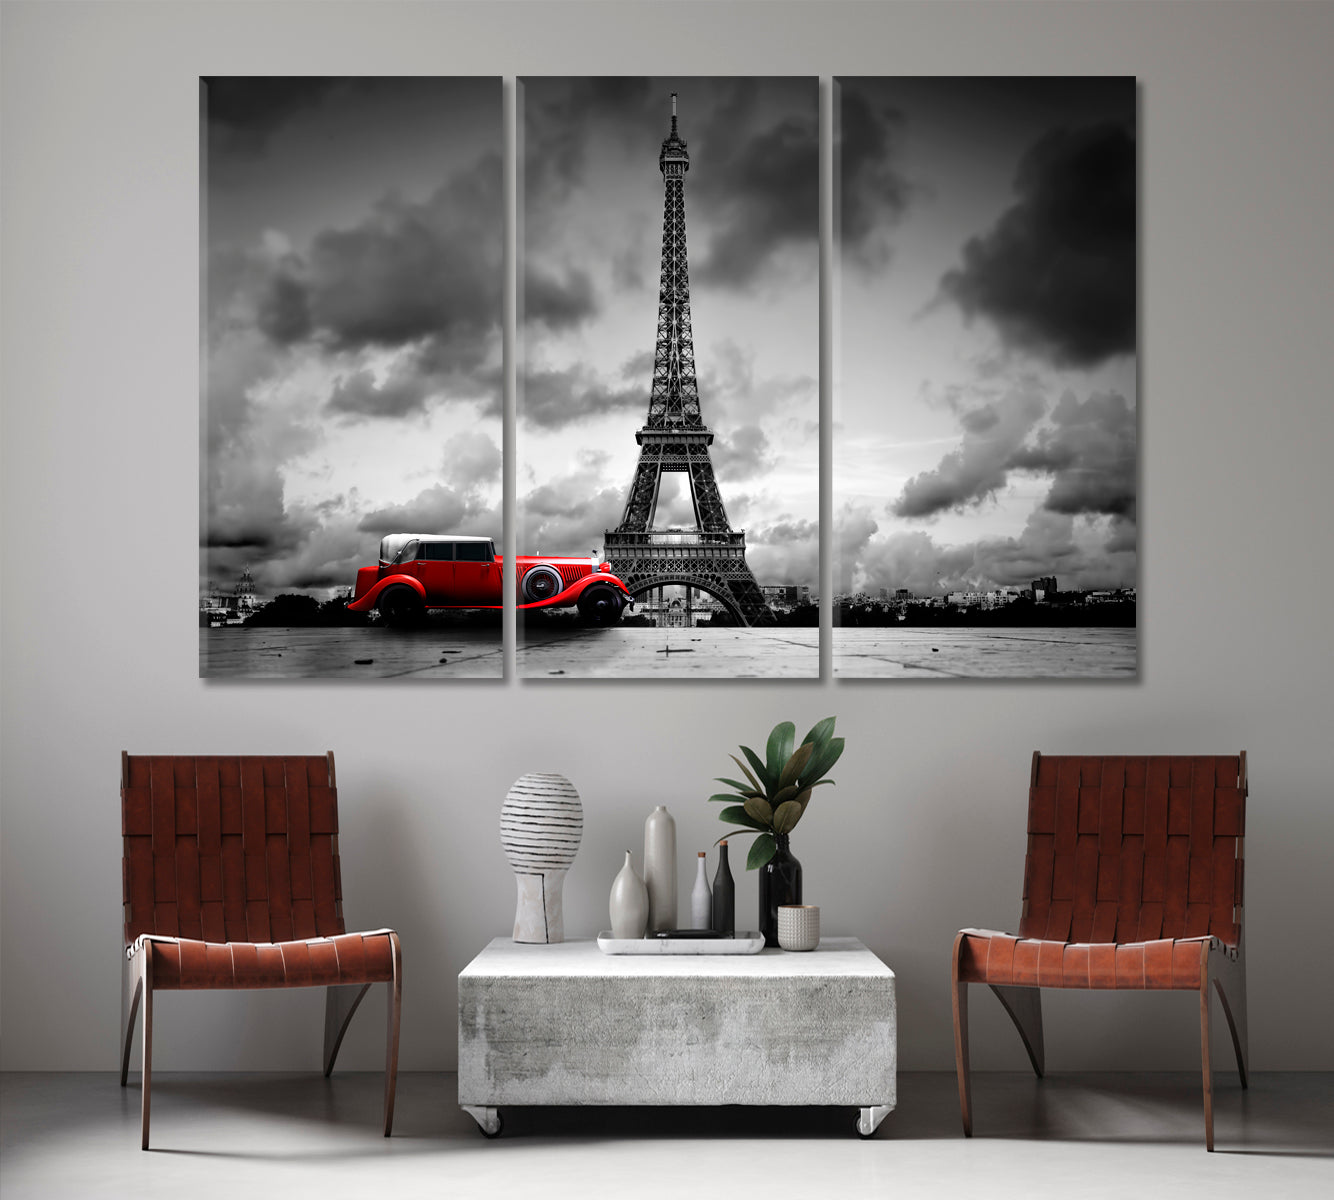 Eiffel Tower Paris France Red Retro Car Black and White Vintage Artistic Black and White Wall Art Print Artesty 3 panels 36" x 24" 